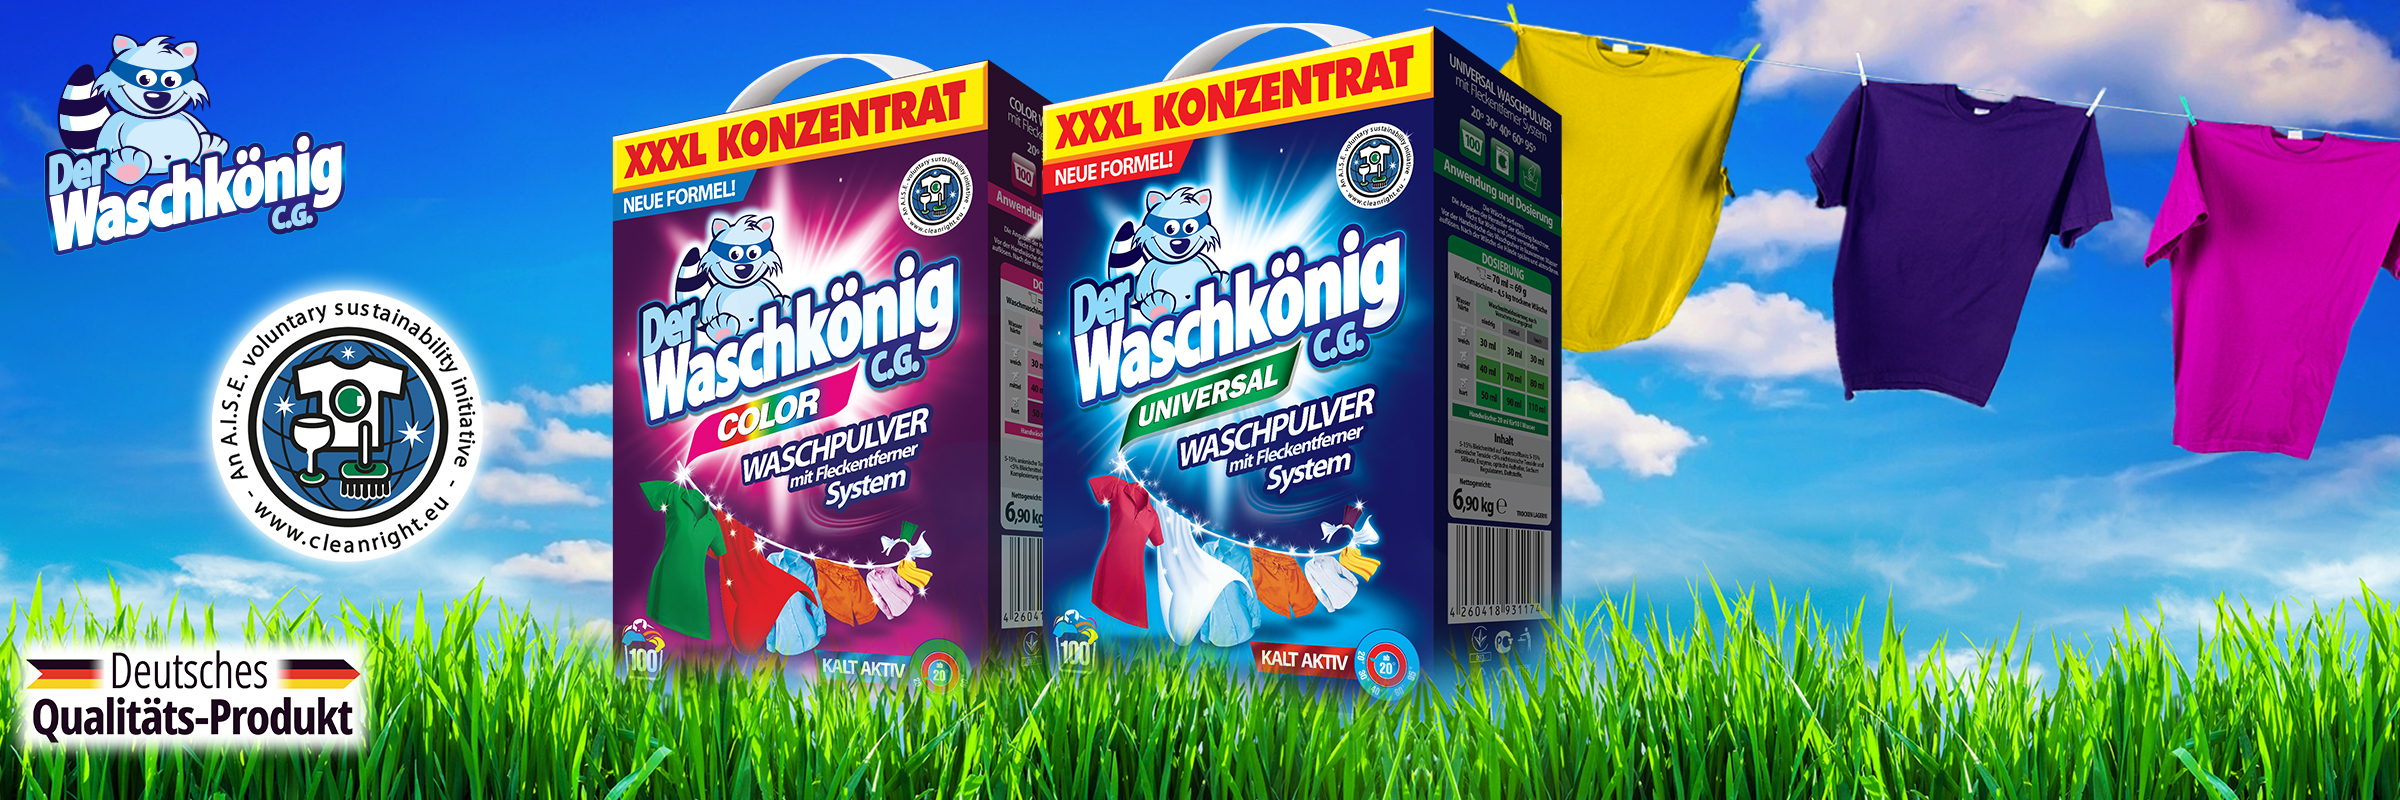 New product - Even more concentrated powders Der Waschkönig